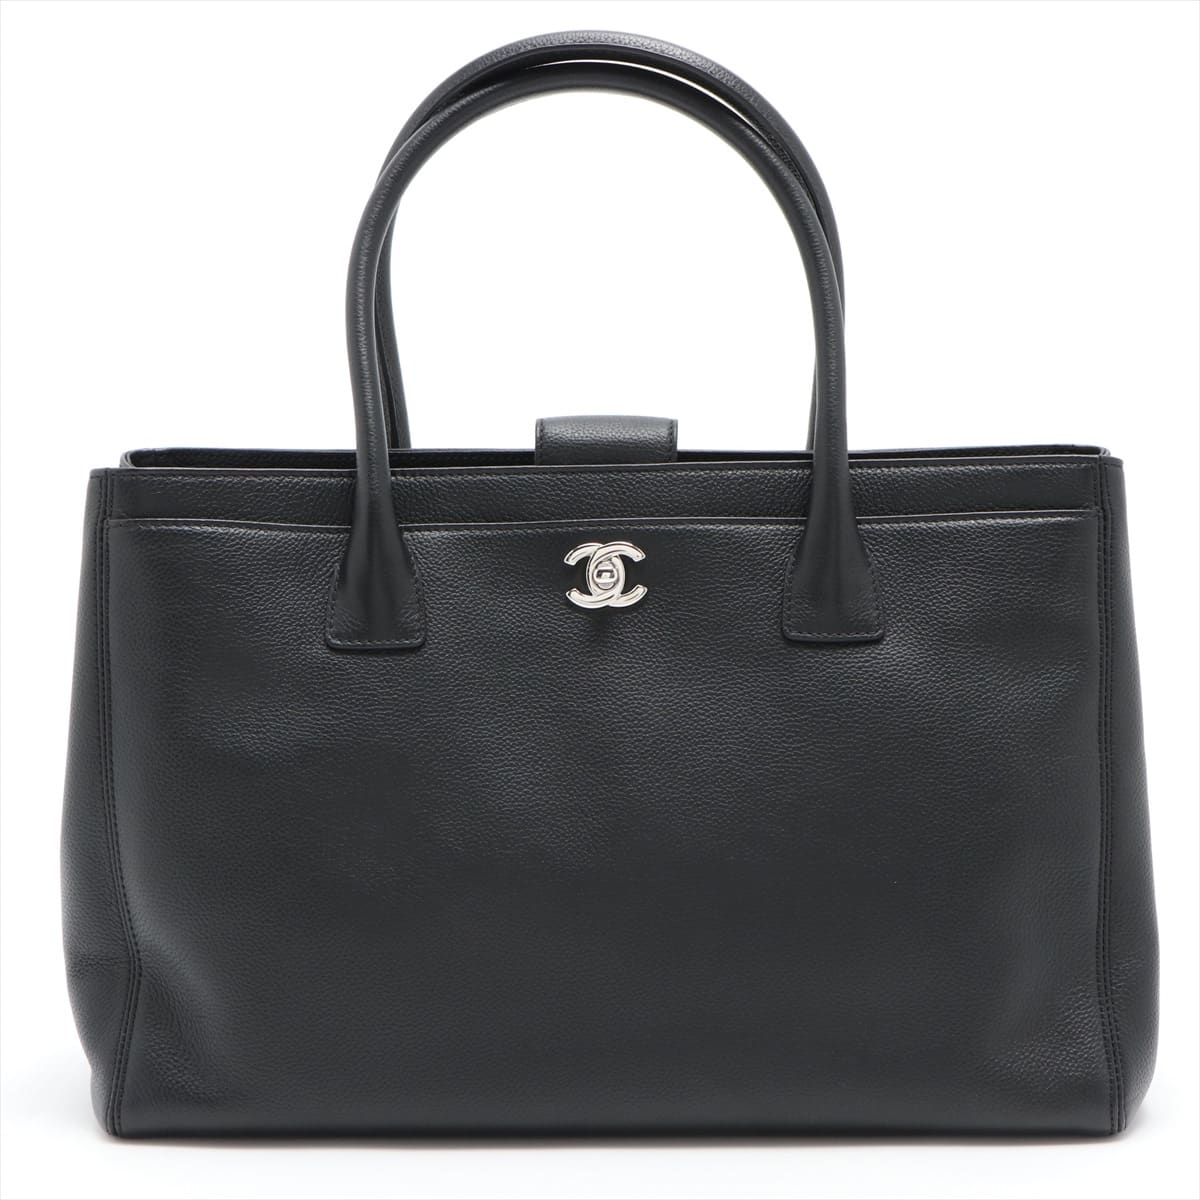 Chanel Executive Leather Tote bag Black Silver Metal fittings 15XXXXXX Comes with divider pouch